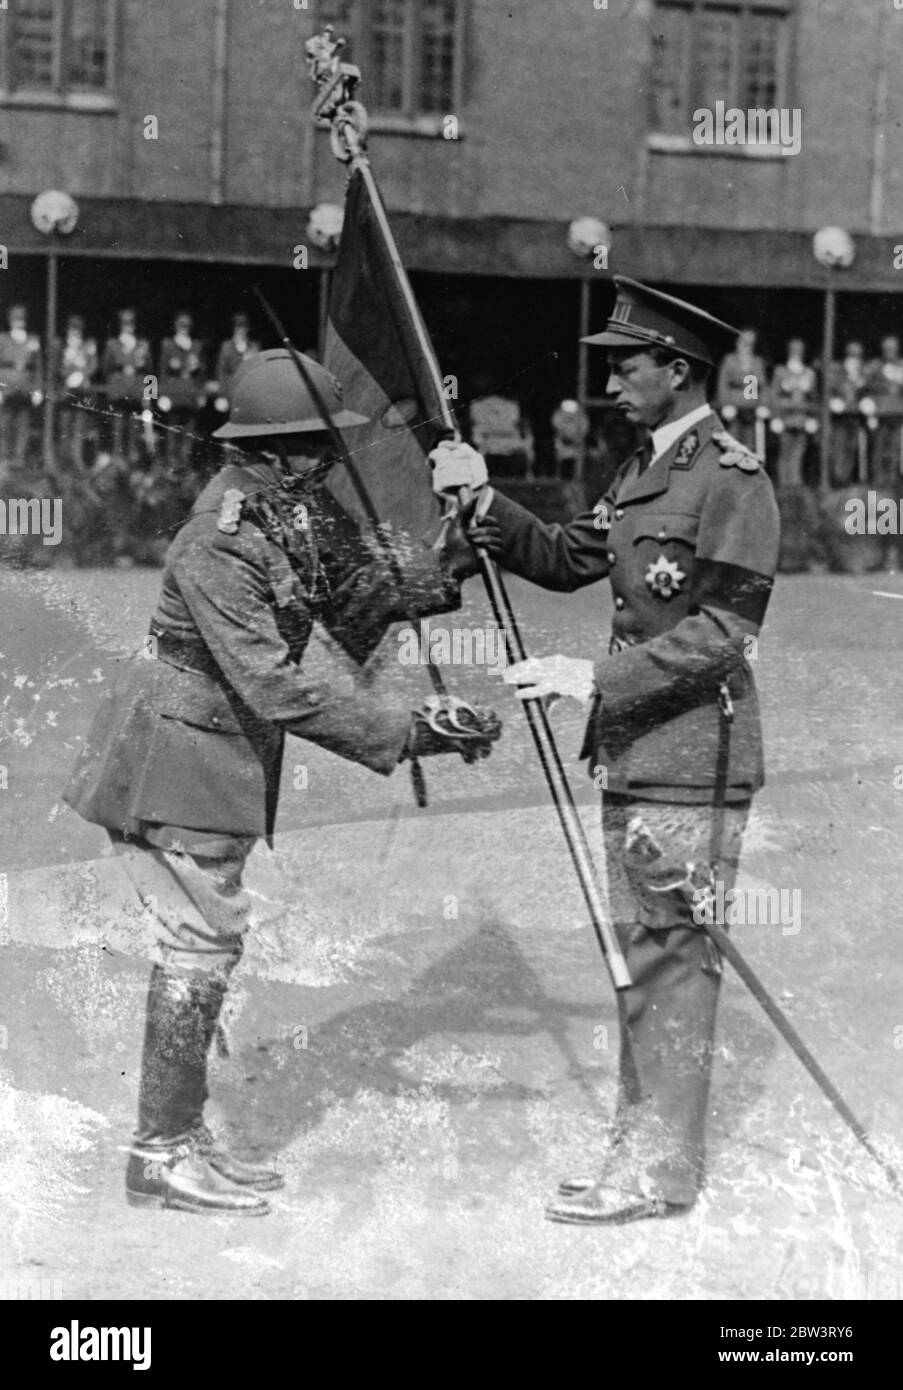 King Leopold Presents New Standard to Anti - Aircraft Regiment . King Leopold of the Belgians presented a new standard to the 2nd Regiment of Defence against Aircraft at the Saint - Anne Barracks , Laeken near Brussels . Photo shows : King Leopold presenting the standard . 24 Jul 1936 Stock Photo